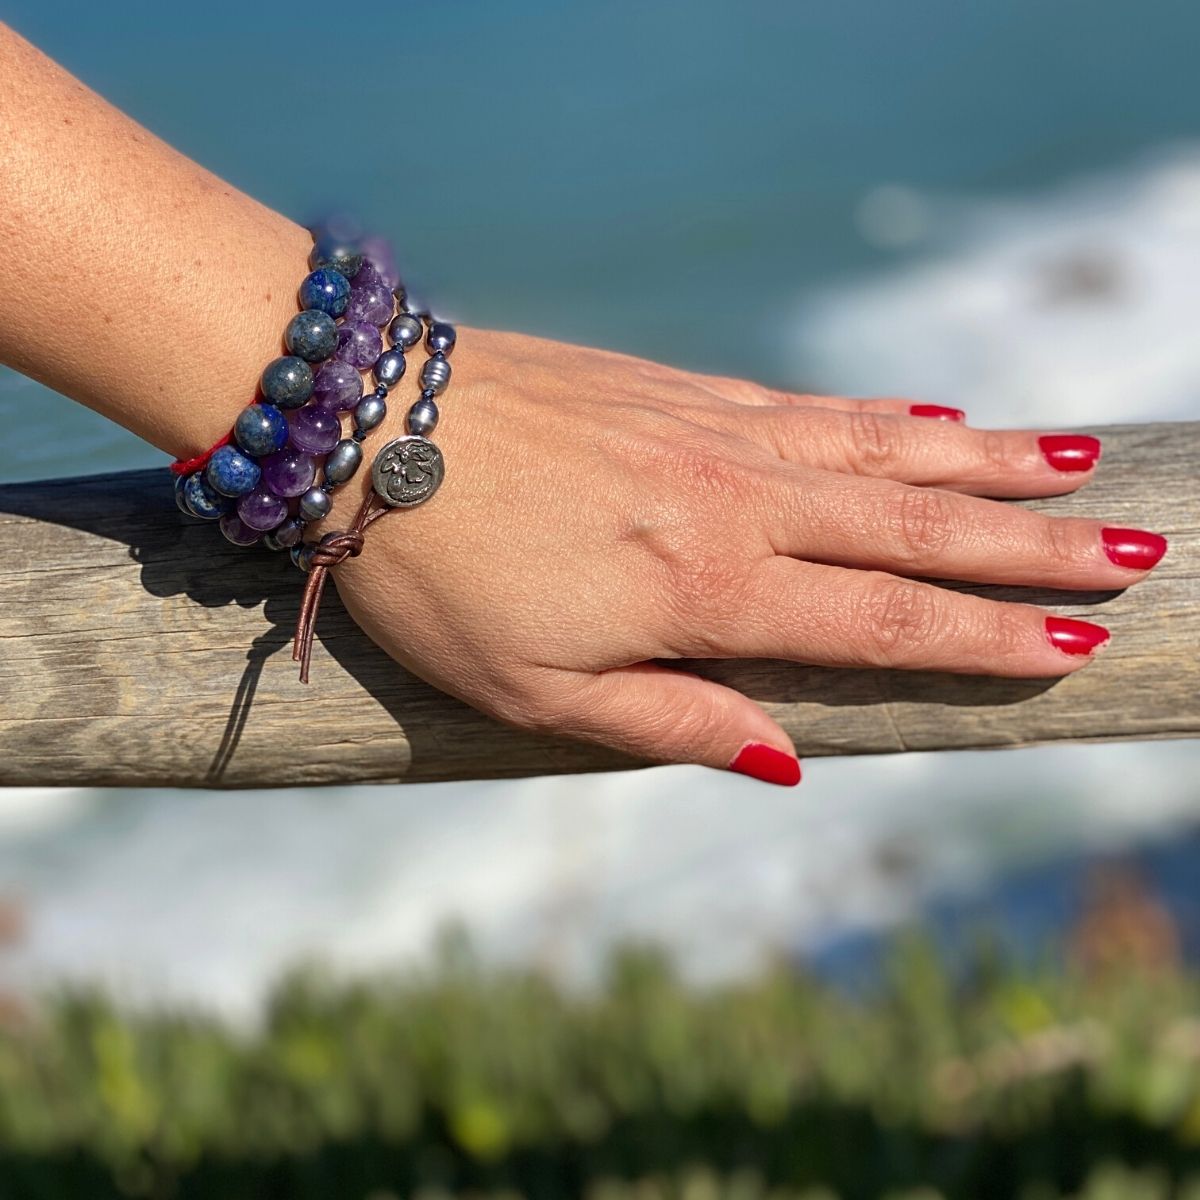 Do you have a free spirit and a happy heart? If you believe in yourself and trust your soul, you can achieve all of your dreams. This Free Spirit Bracelet Stack is the reflection of that feeling.